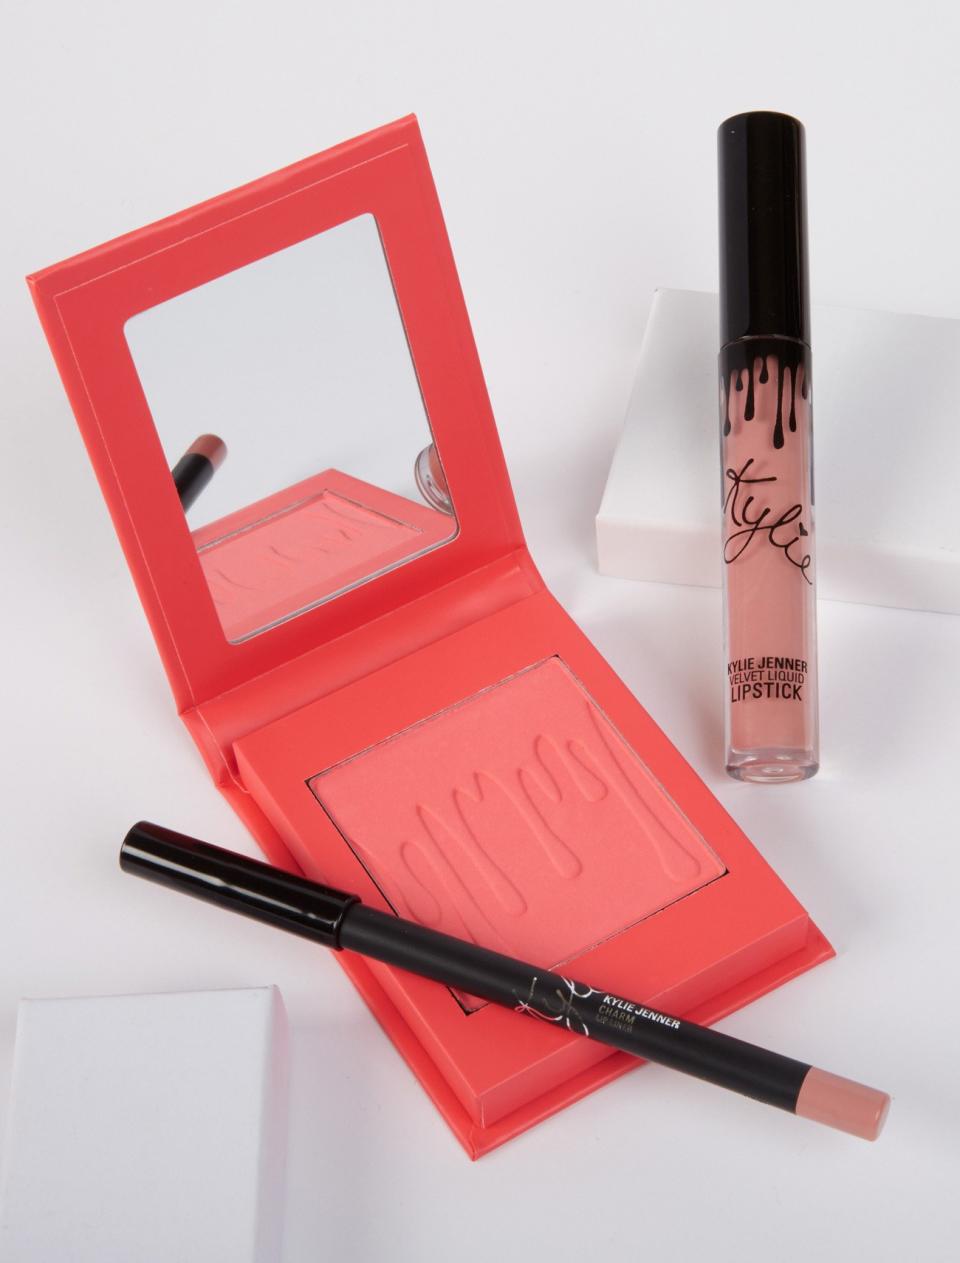 The Kylie Cosmetics Pink Bundles comes with pink blushes, liquid lipsticks, highlighter, and eye shadow — all in one place.